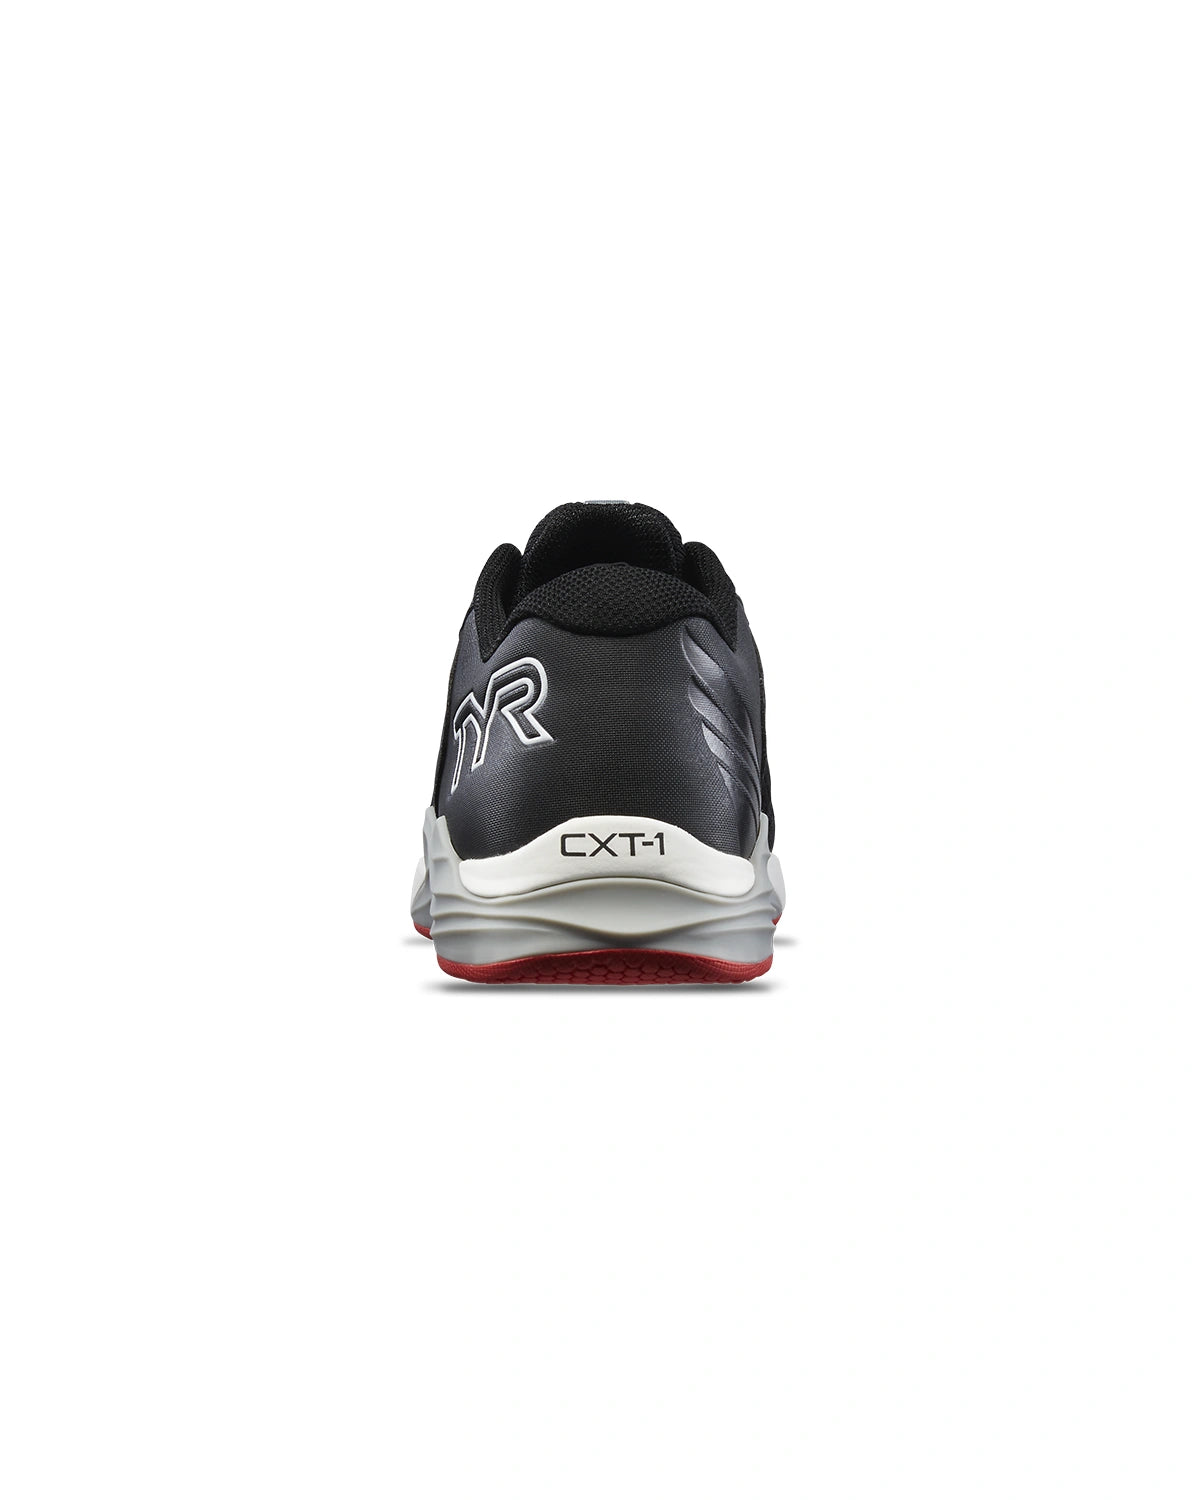 TYR CXT-1 Trainer (Black/Red)